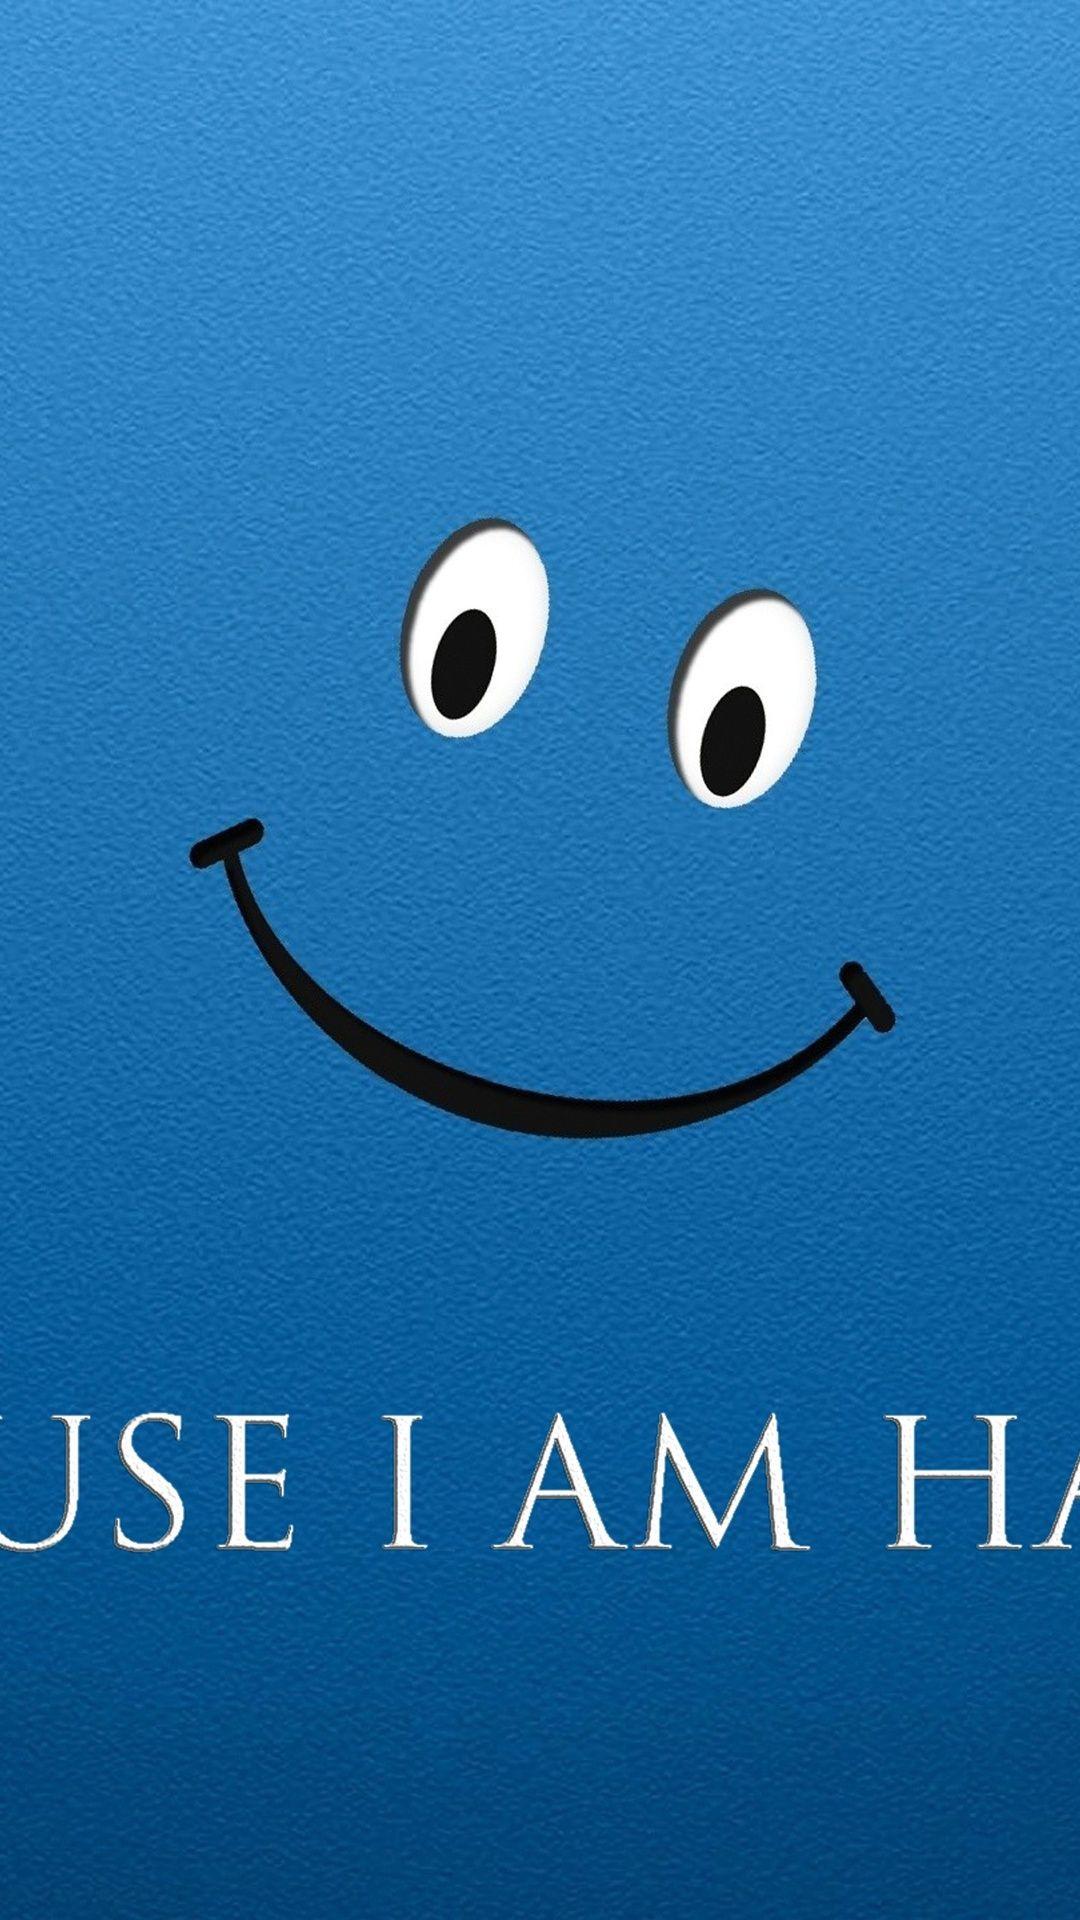 Happy Face Iphone Wallpapers Top Free Happy Face Iphone Backgrounds Wallpaperaccess